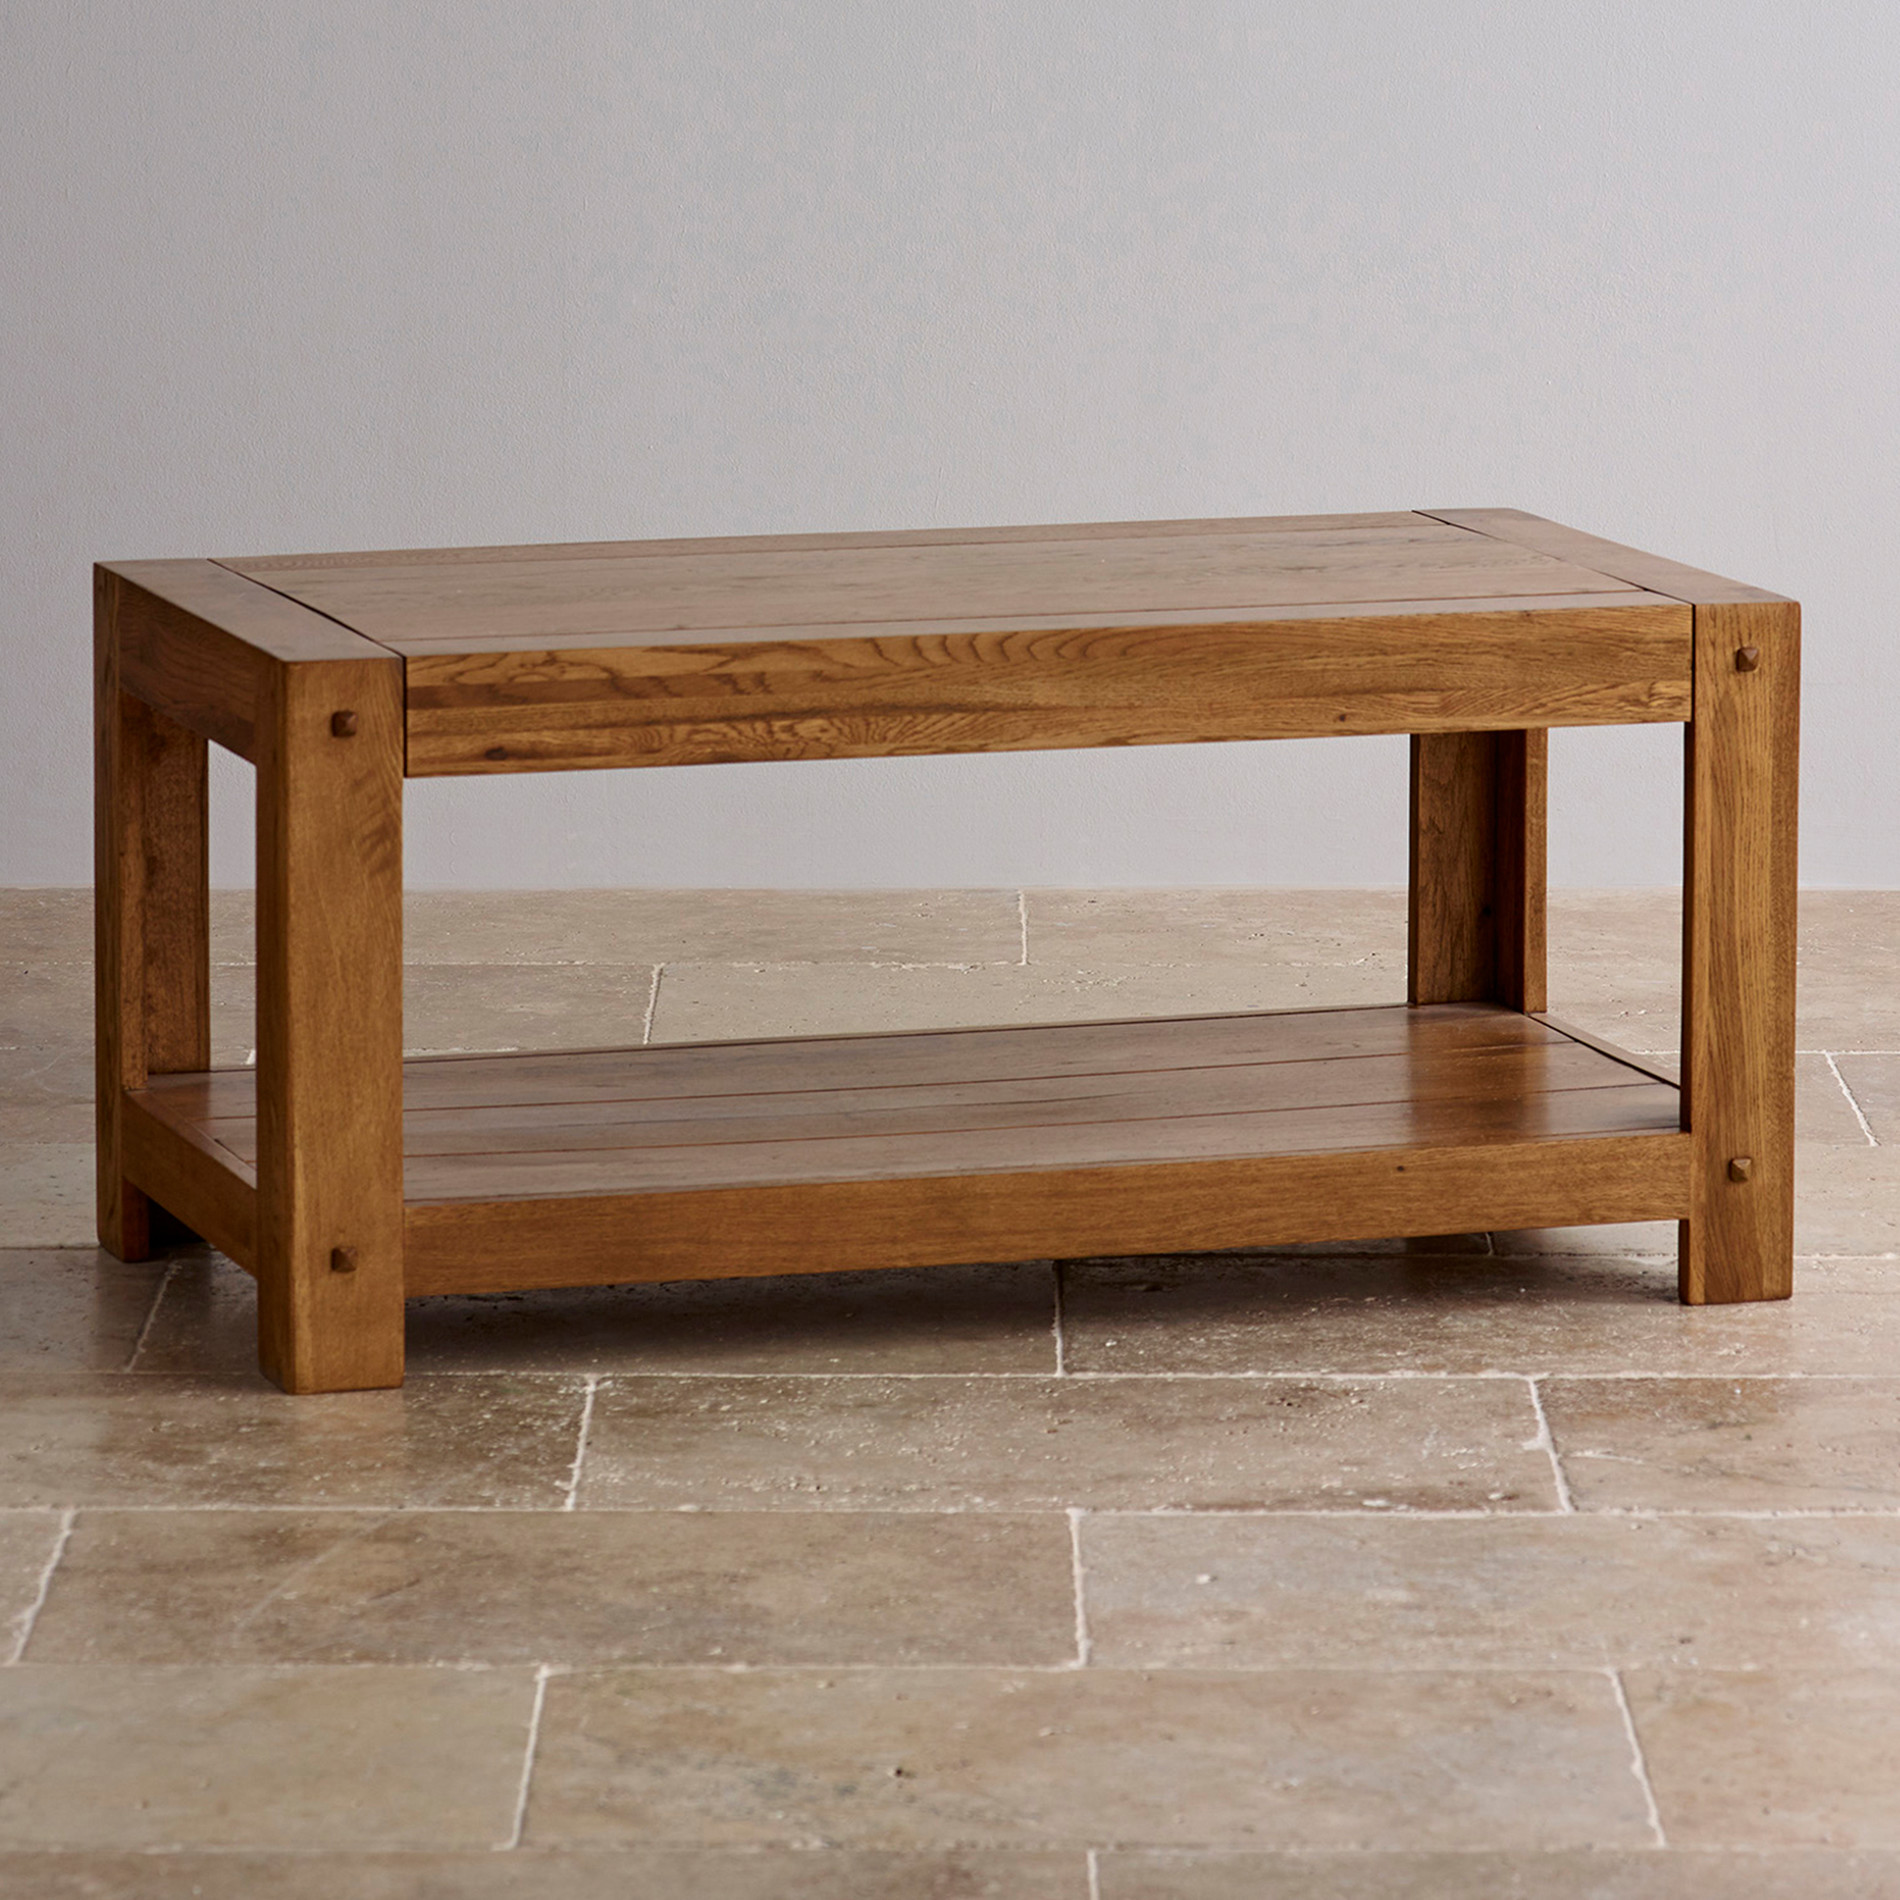 Best ideas about Oak Coffee Table
. Save or Pin Quercus Coffee Table in Rustic Solid Oak Now.